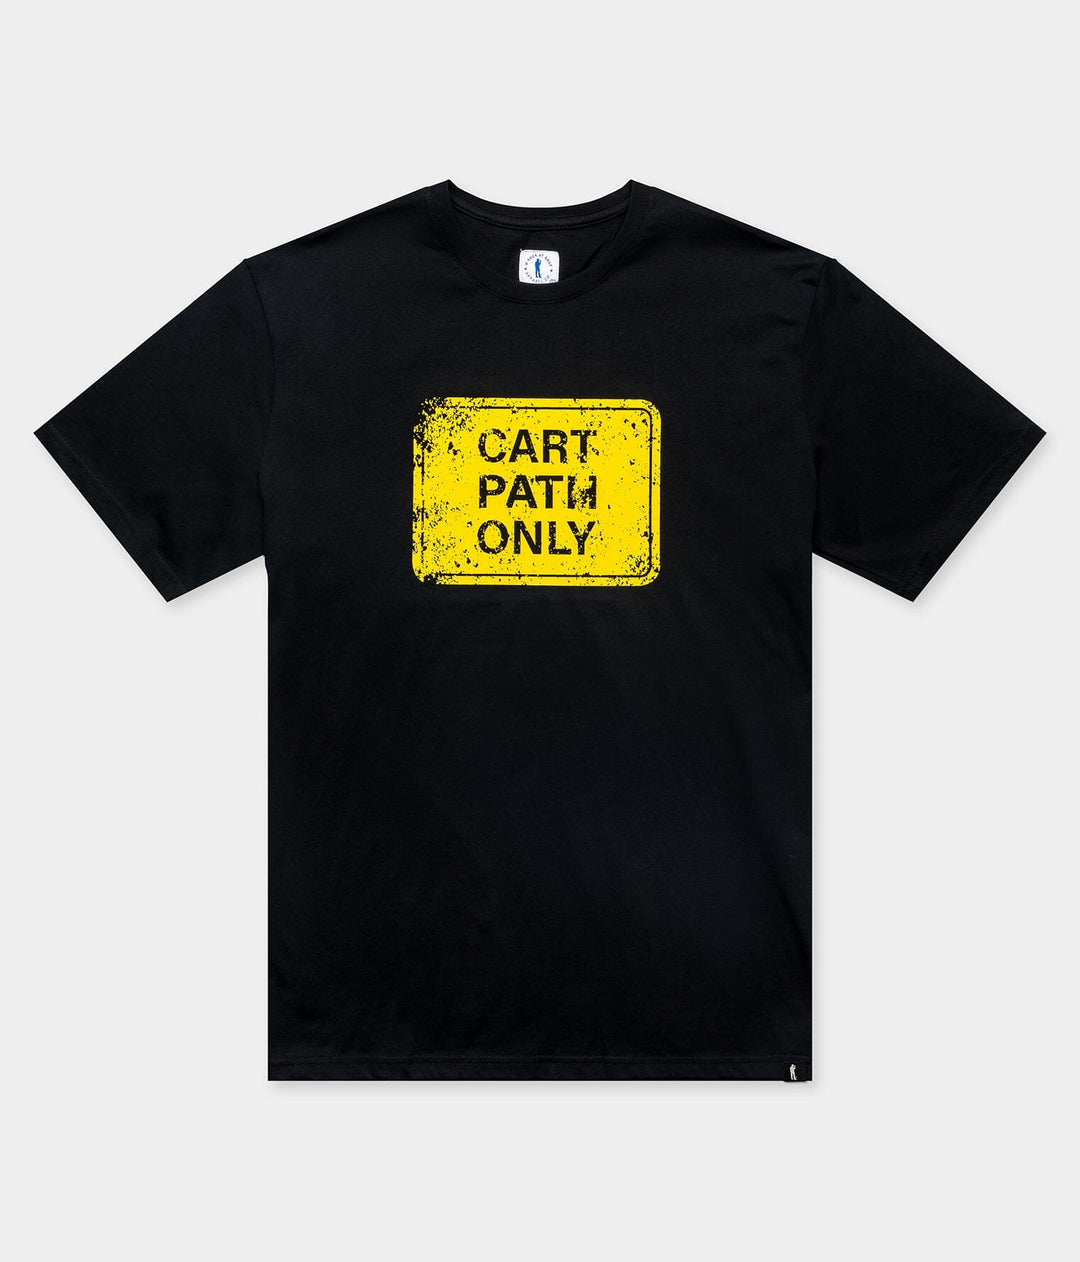 Cart Path Only Tee